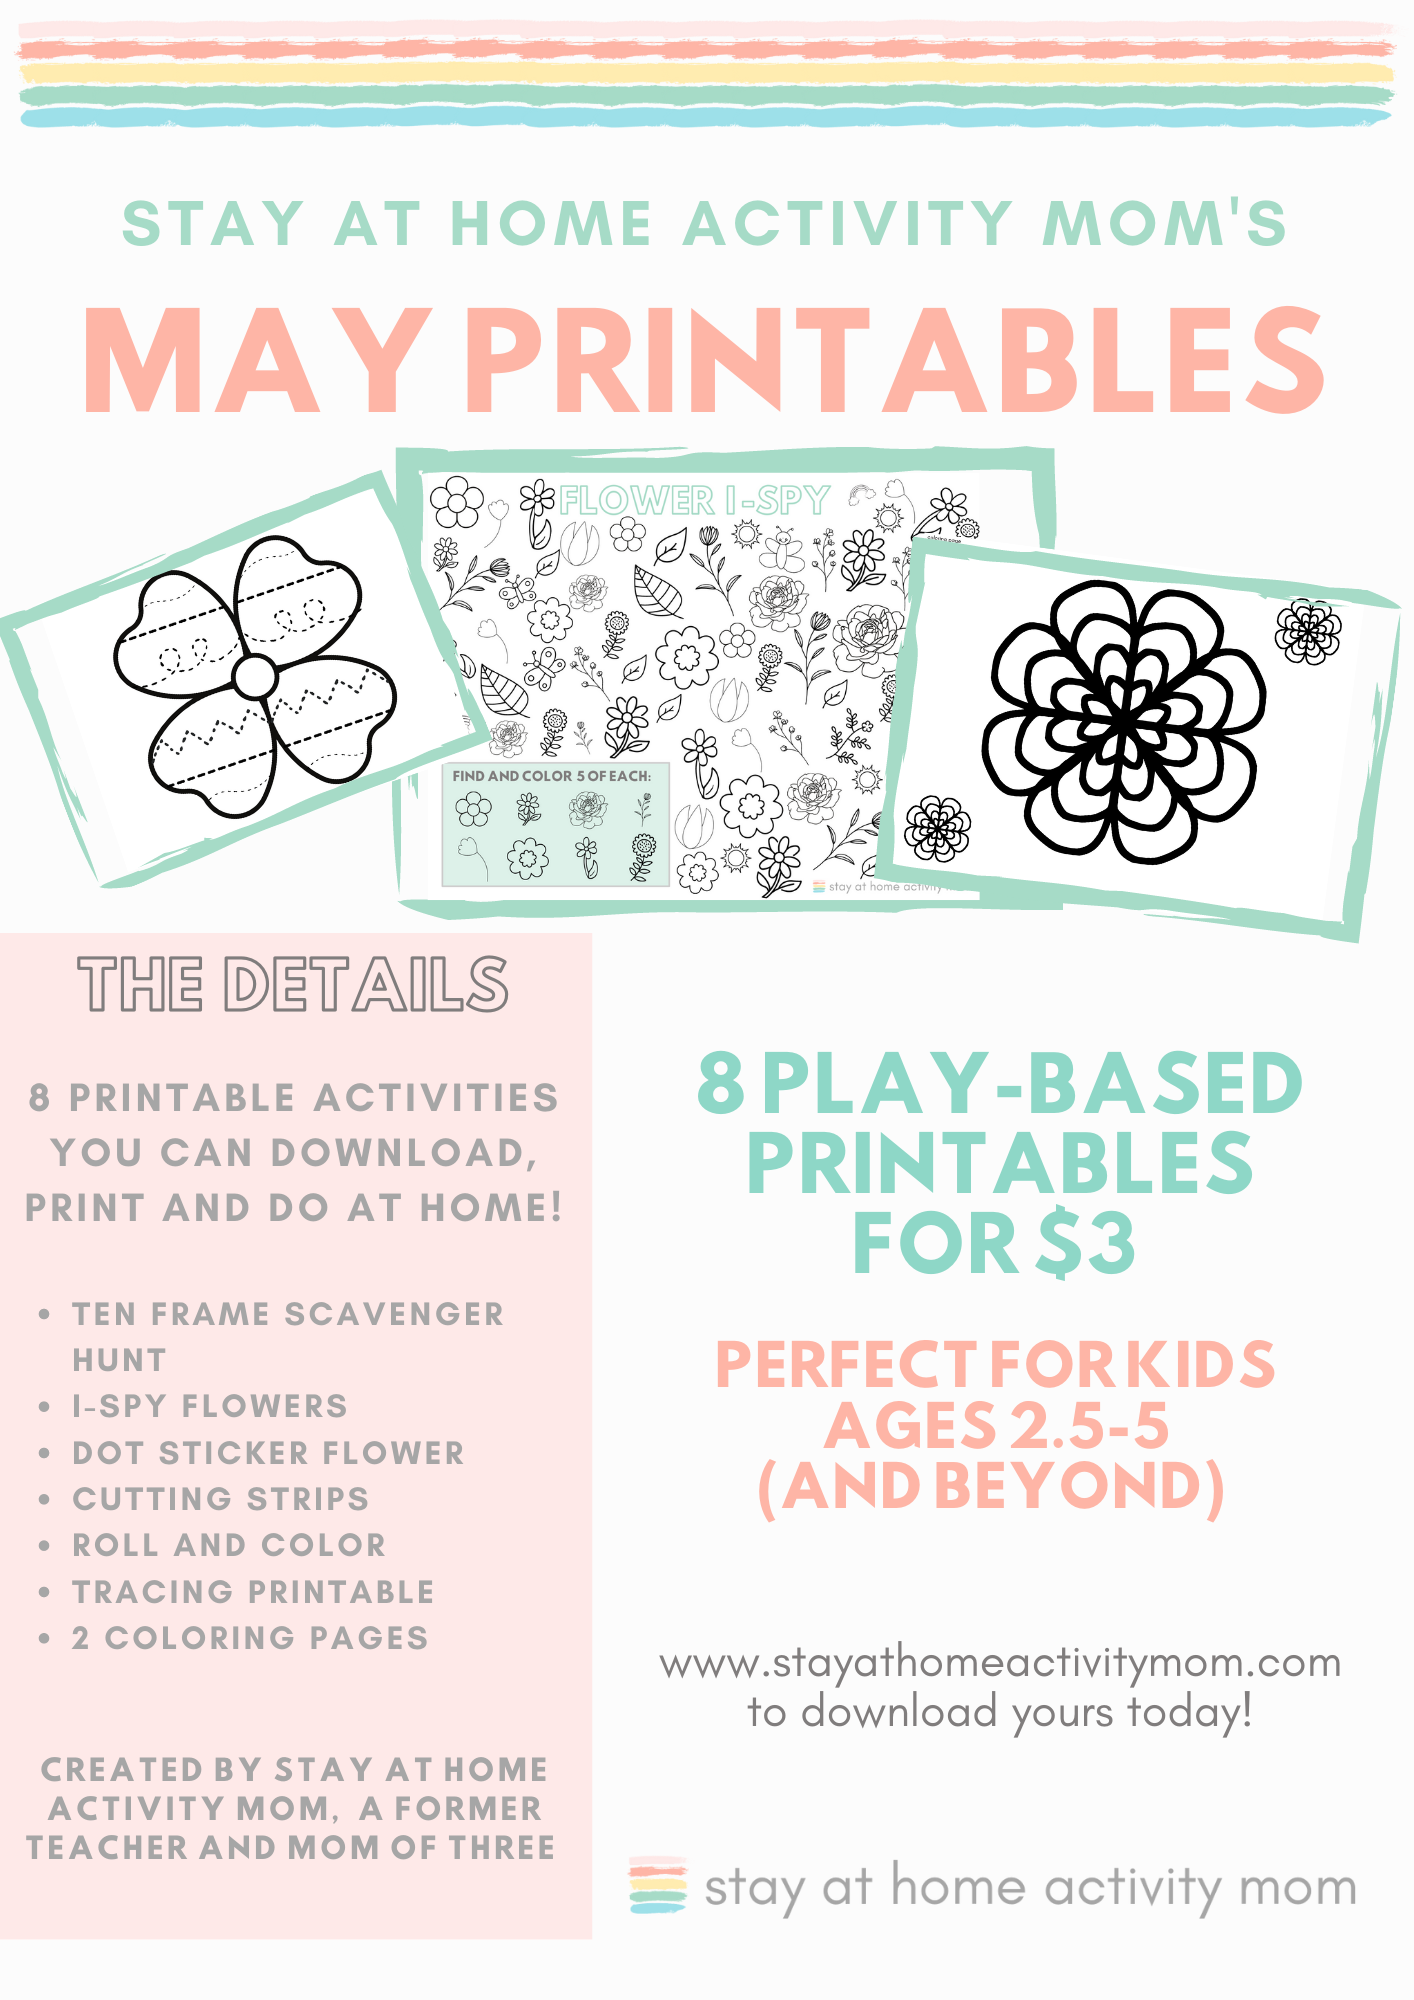 Printable Nature Journal for Kids - The Activity Mom